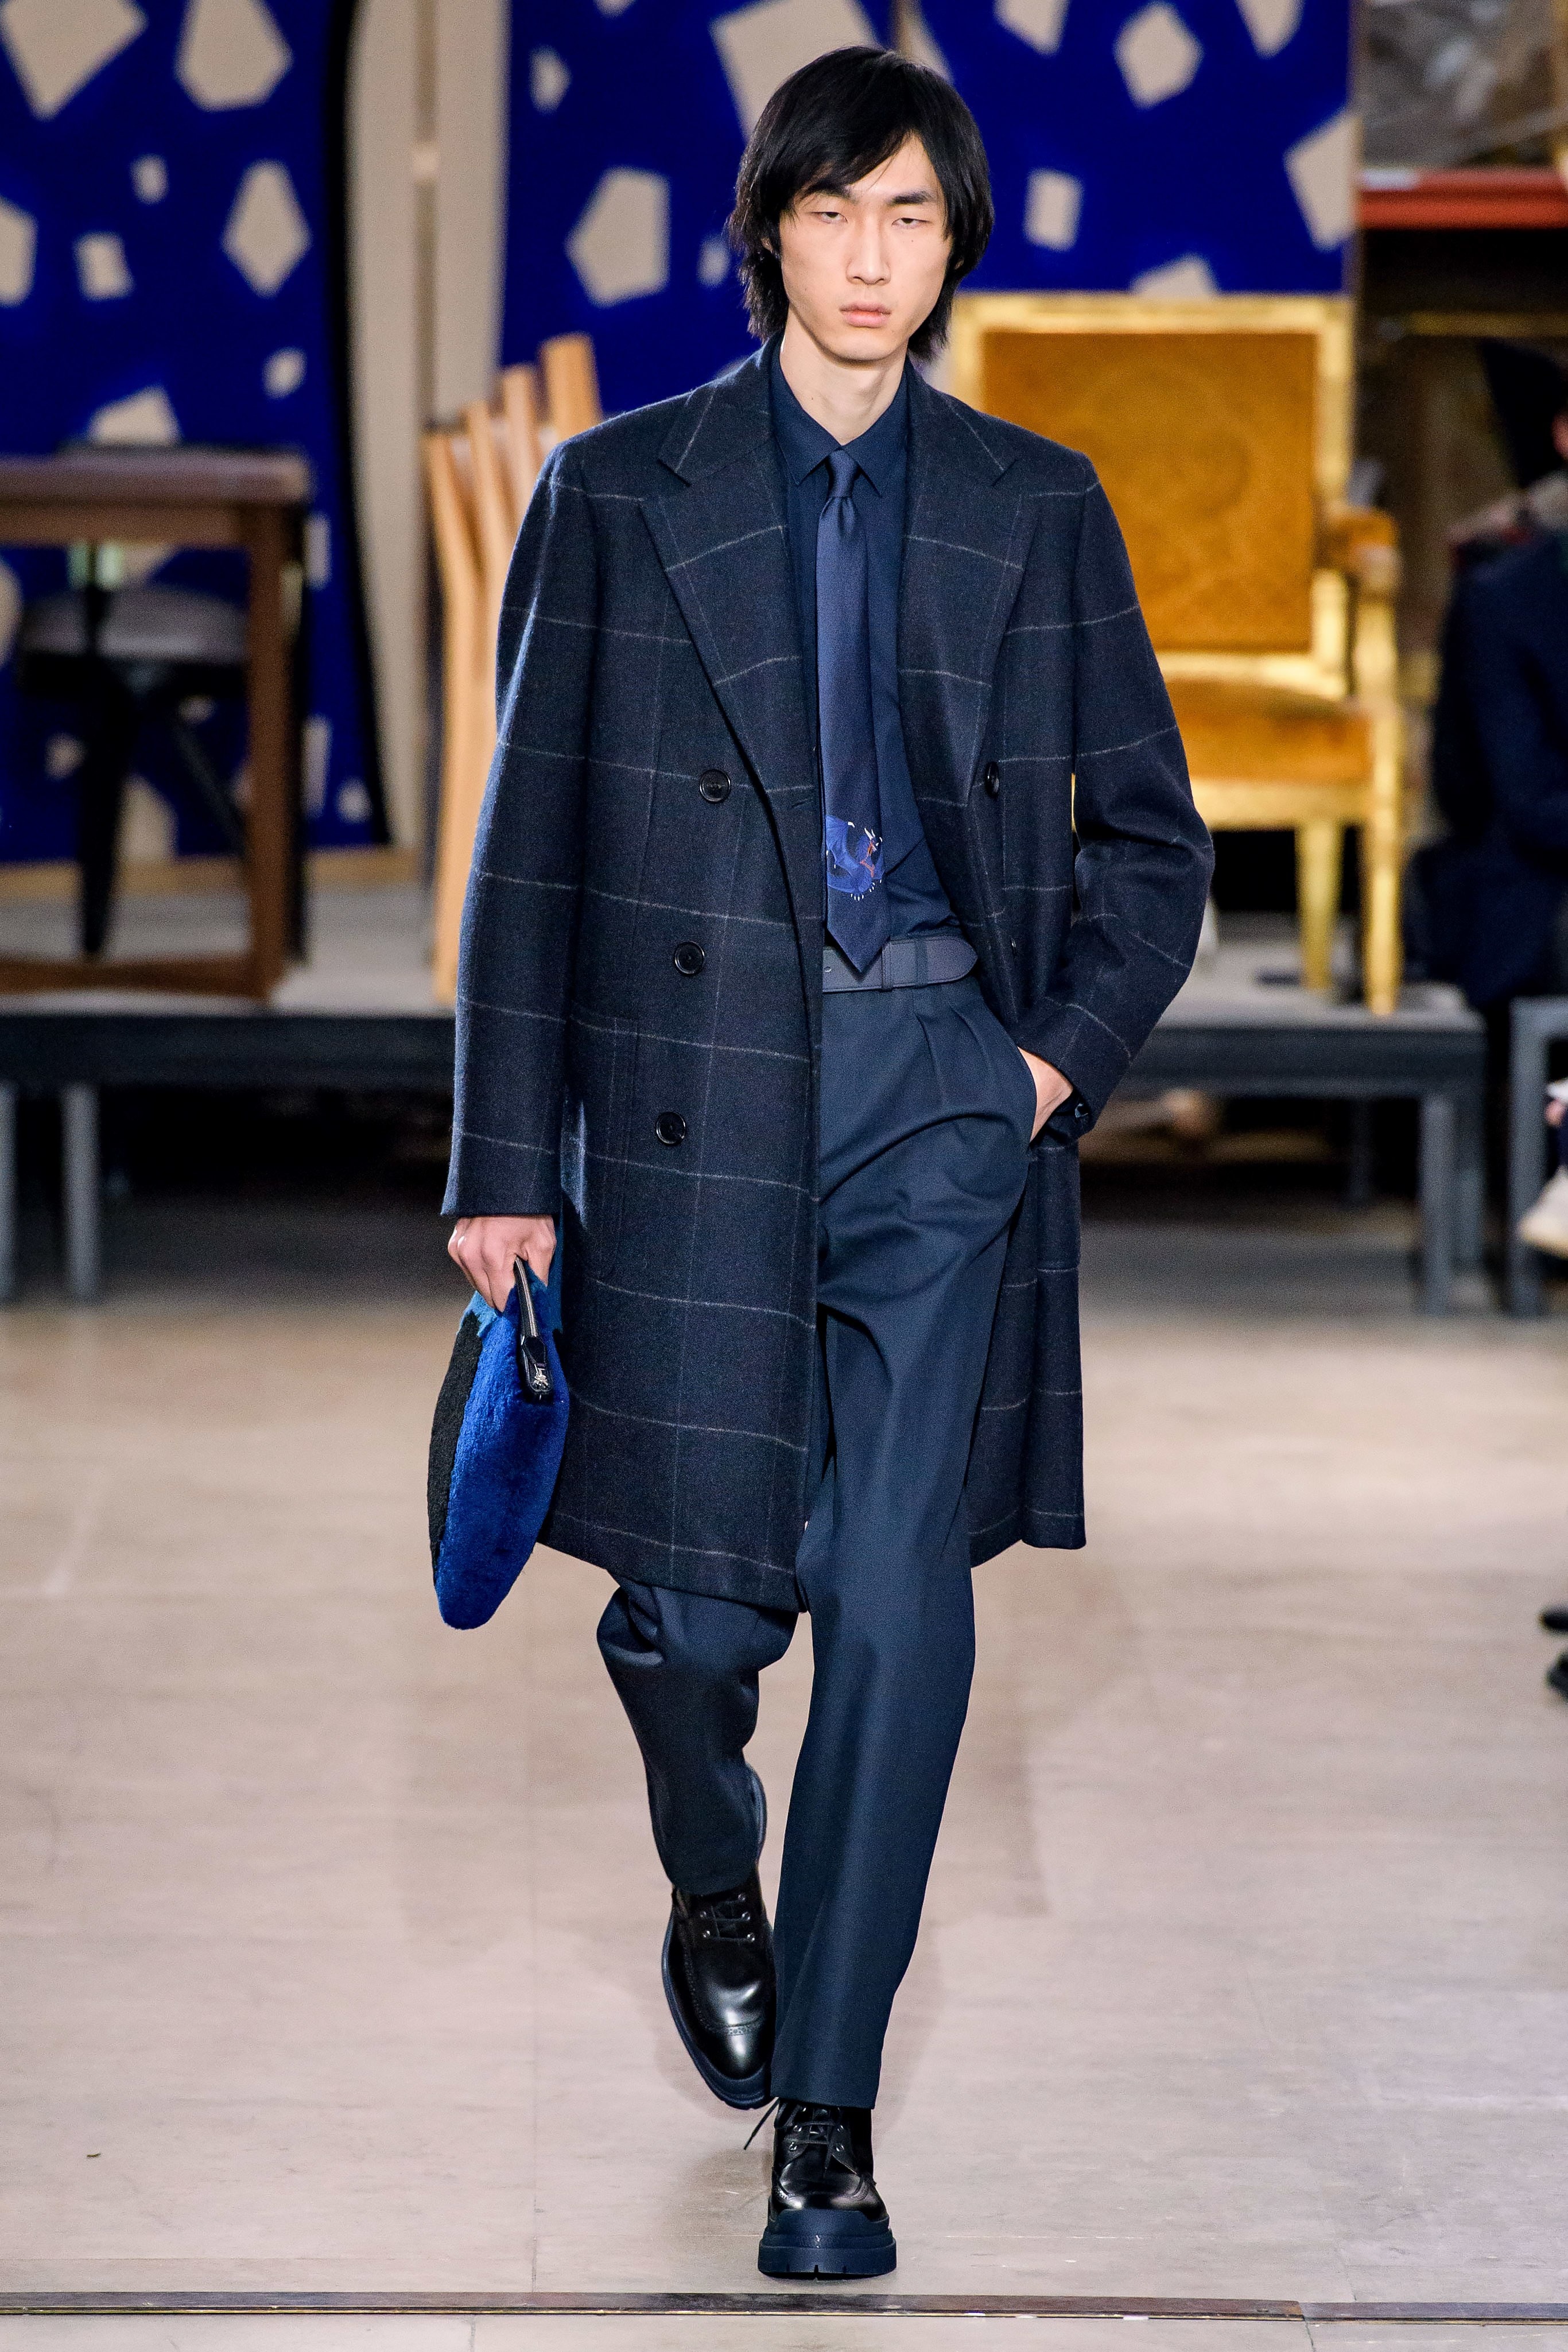 hermes fw19 fall winter 2018 mens menswear collection runway paris fashion week january clothes coats outerwear shirts pants jackets leather blue brown grey gray black orange brown info details